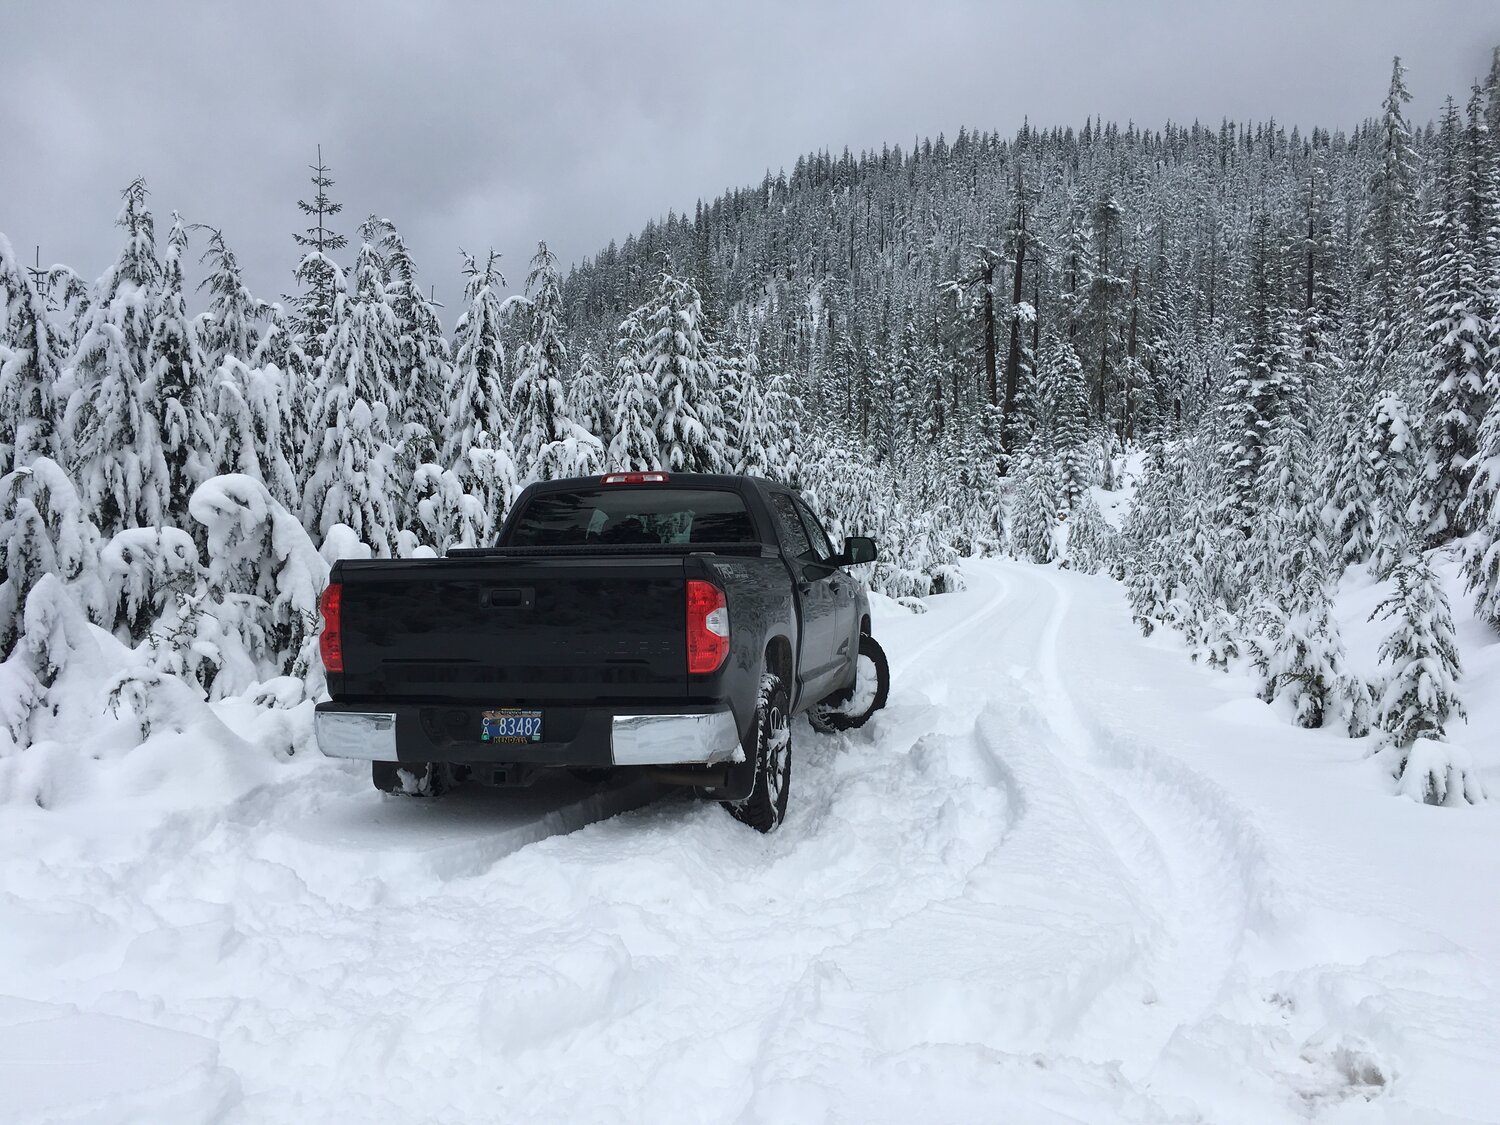 How to drive off-road in deep snow — CalifOregonia